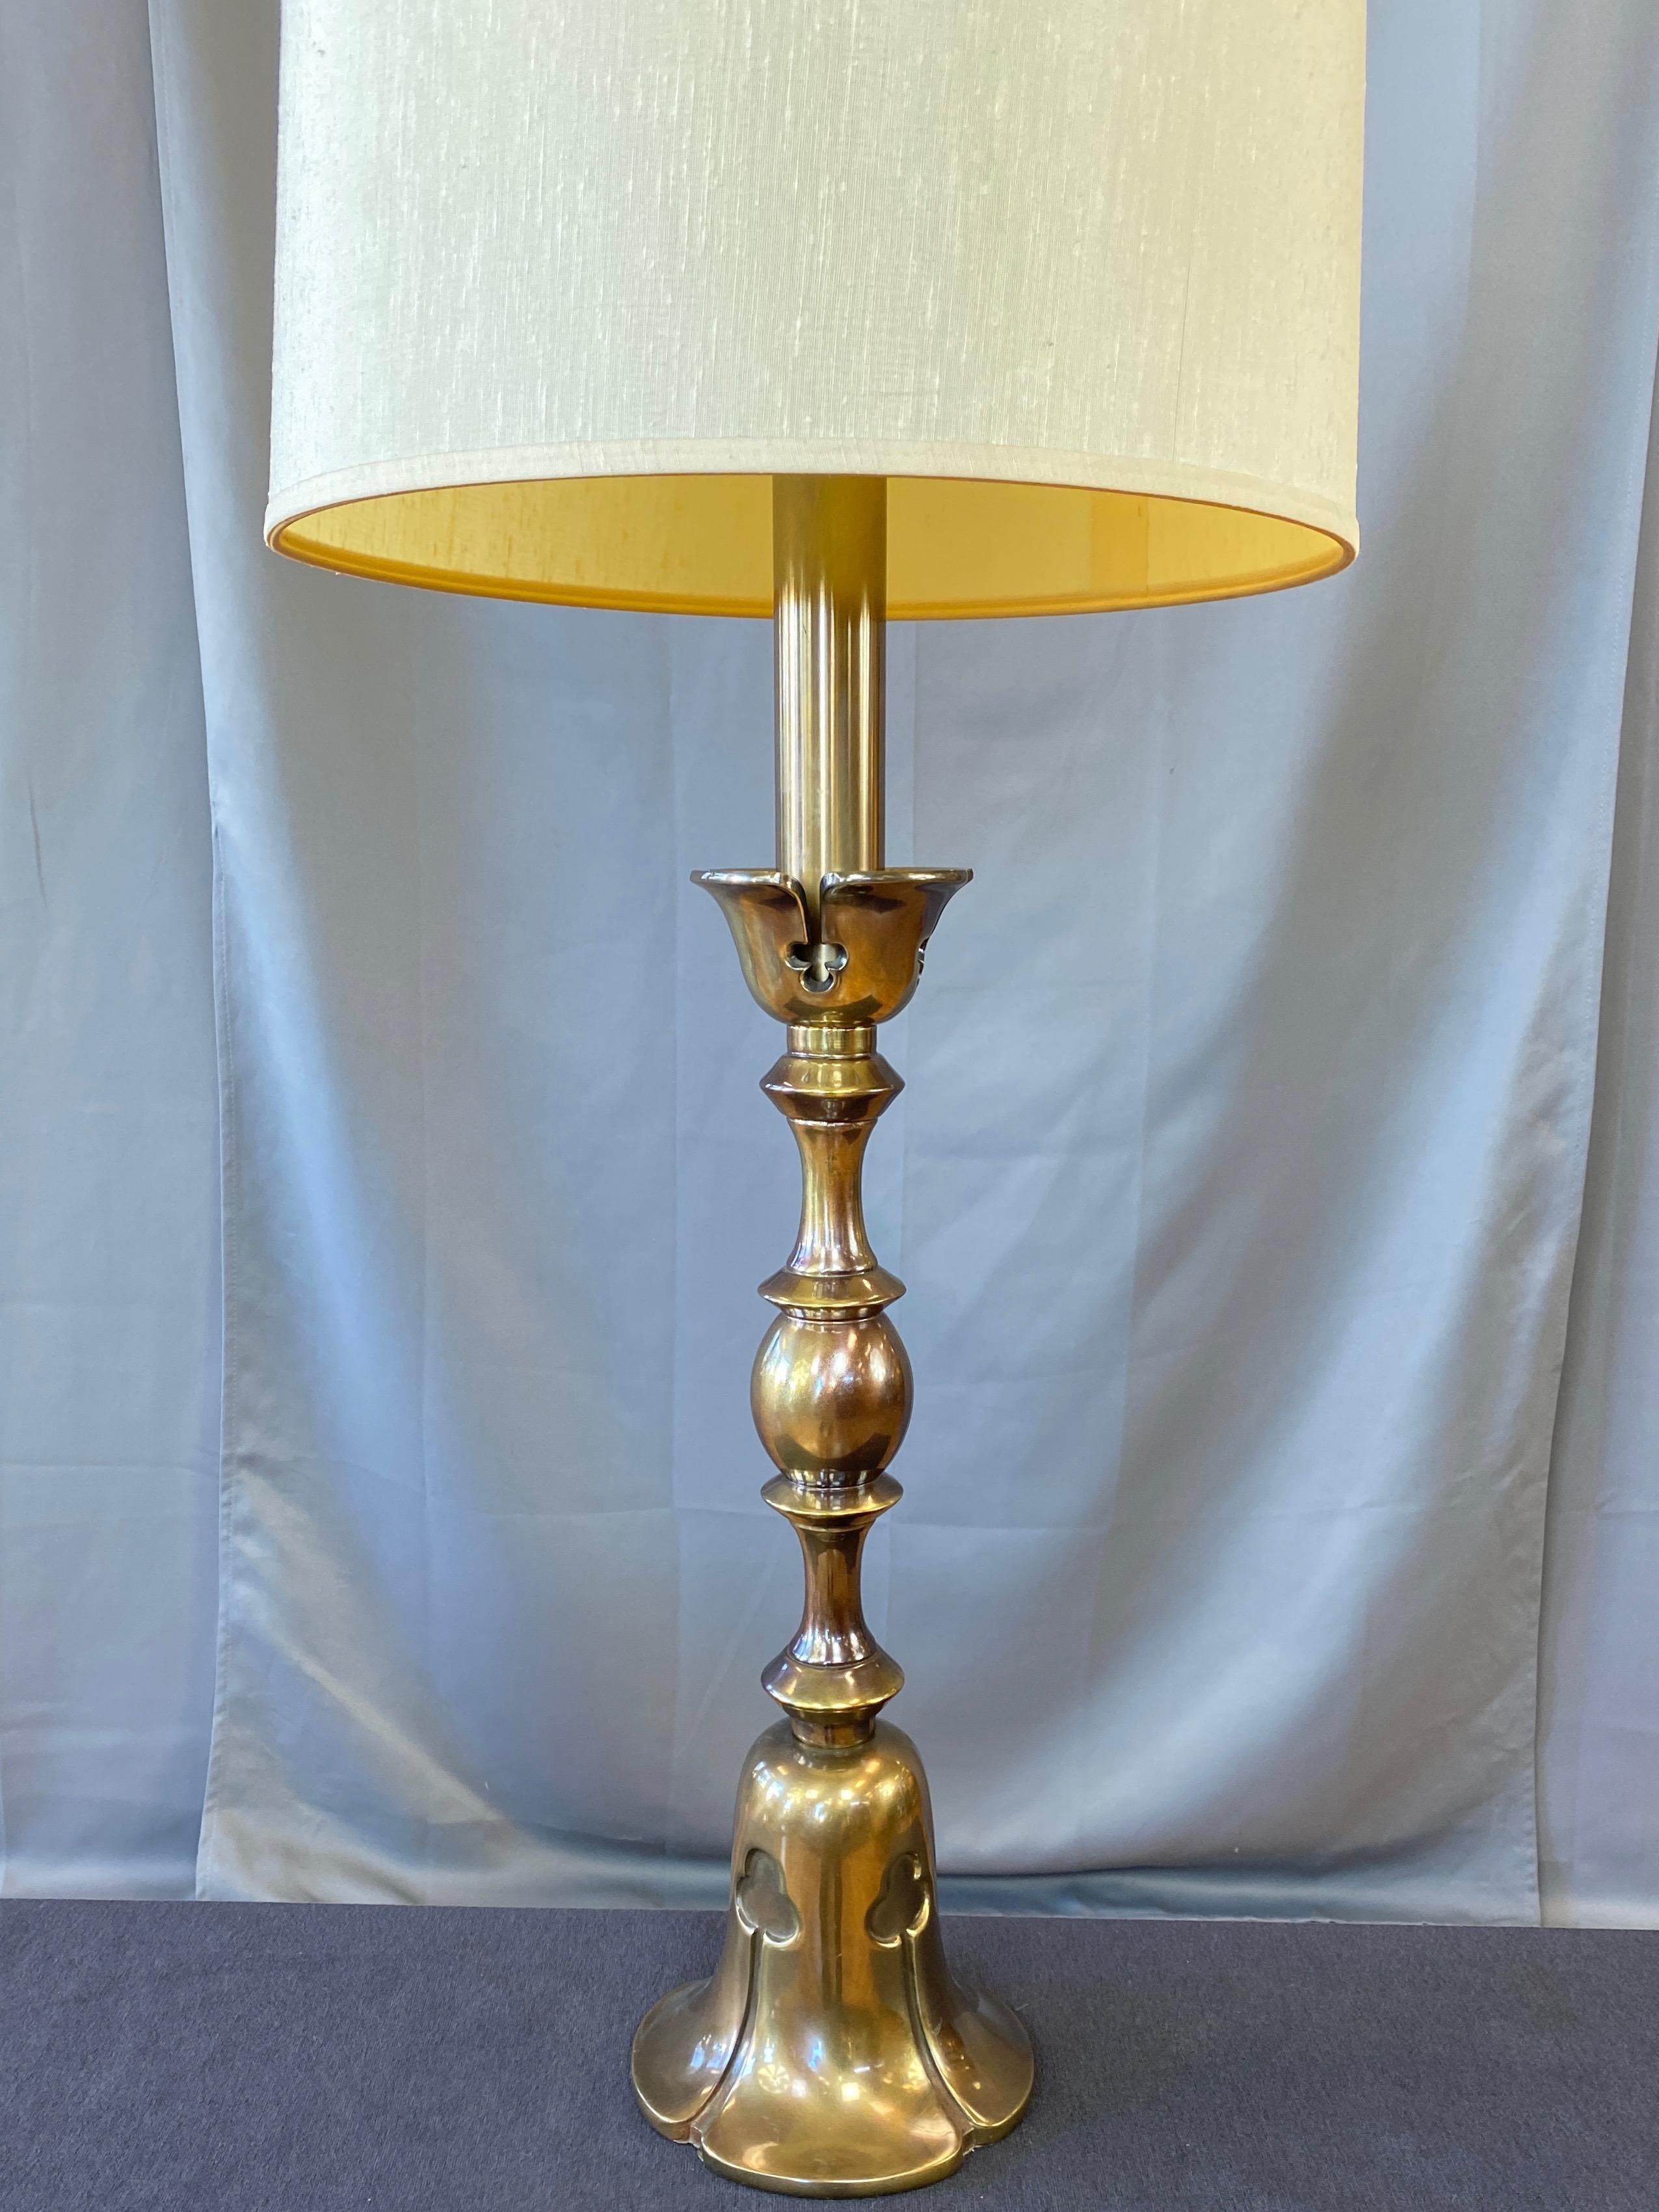 A towering and very uncommon 1950s Hollywood Regency trefoil motif cast brass table lamp with original shades by the Rembrandt Lamp Company.

Excellent craftsmanship, with graceful lines and handsomely proportioned turned metal segments on stately